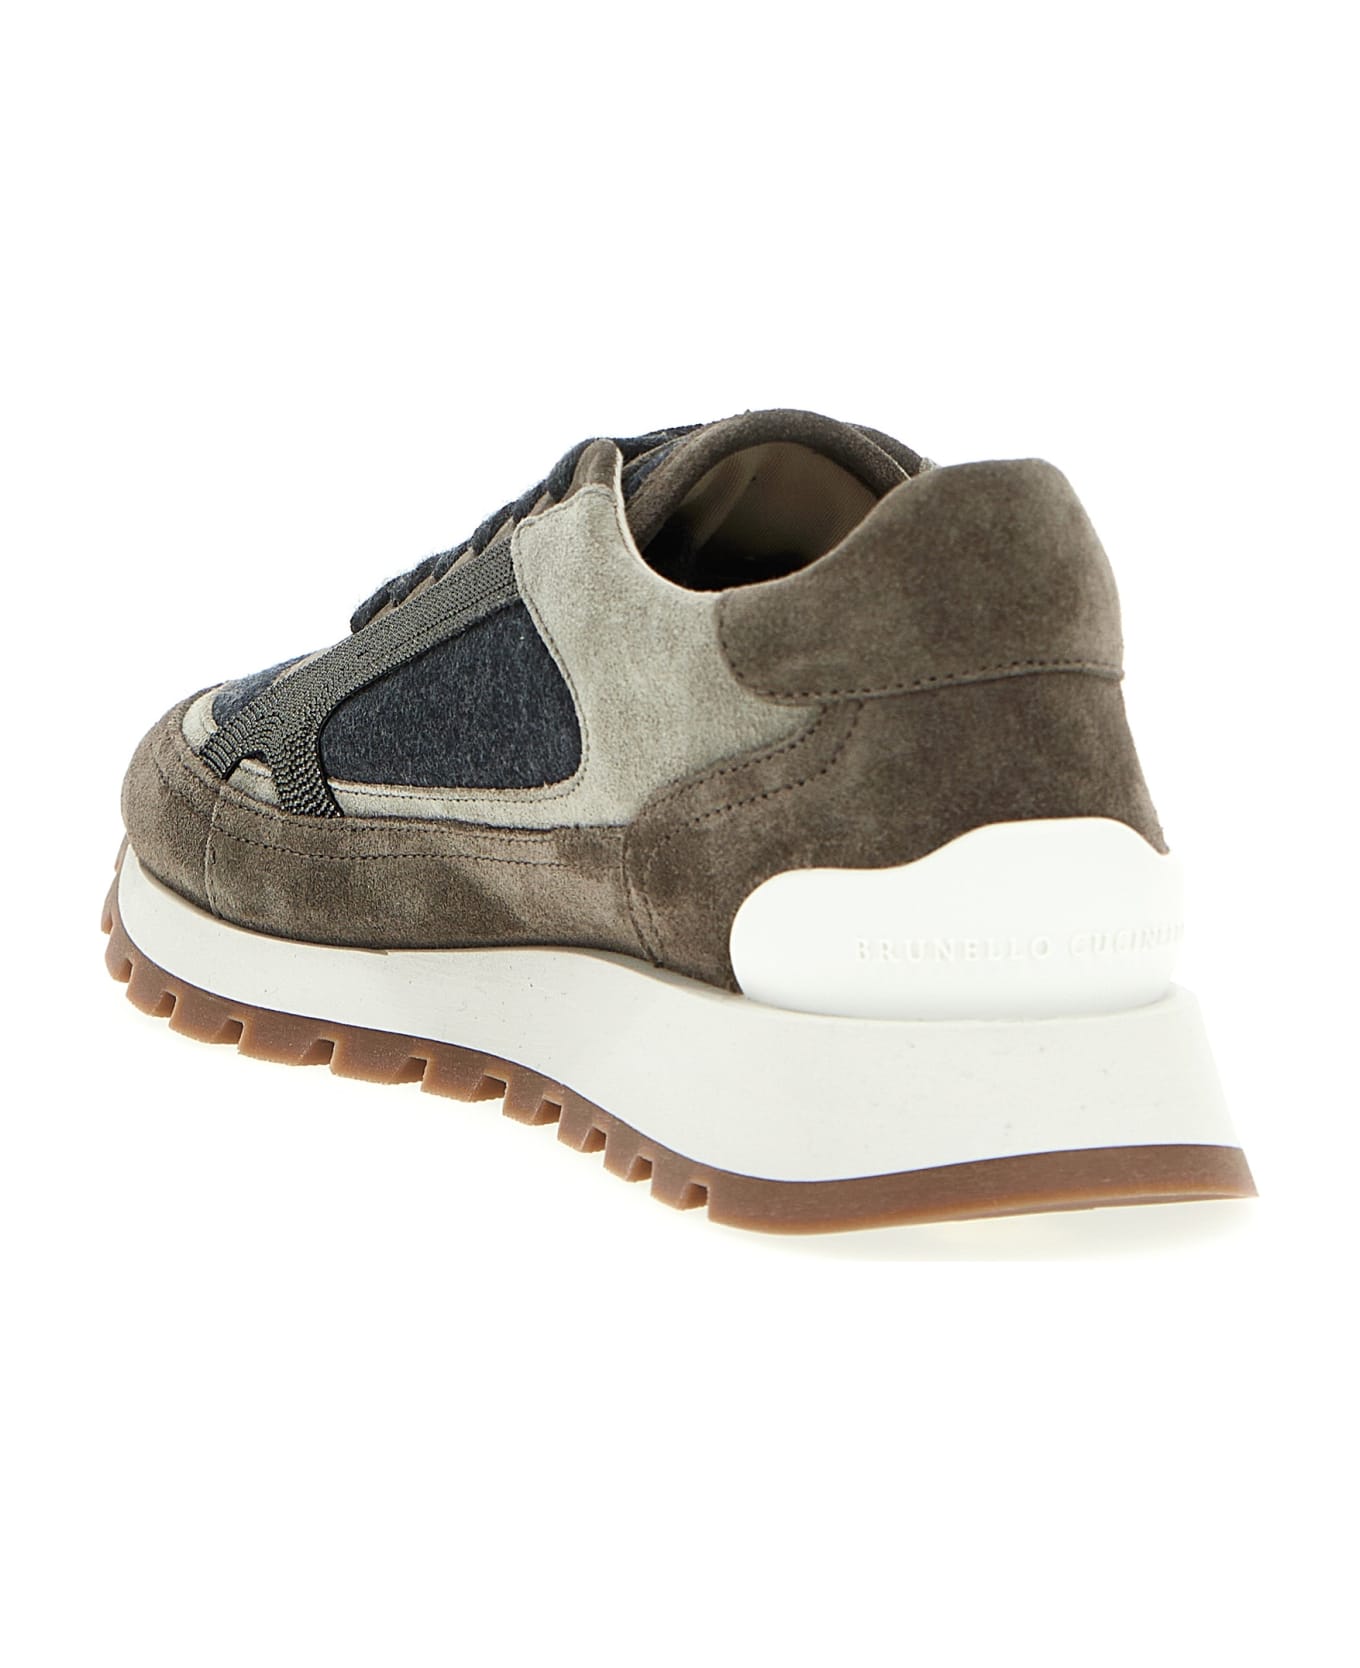 Brunello Cucinelli Suede Runner Sneaker Shoe With Wool Inserts Embellished With Brilliant Monili Detail On The Sides. Closure With Laces - Dark Grey